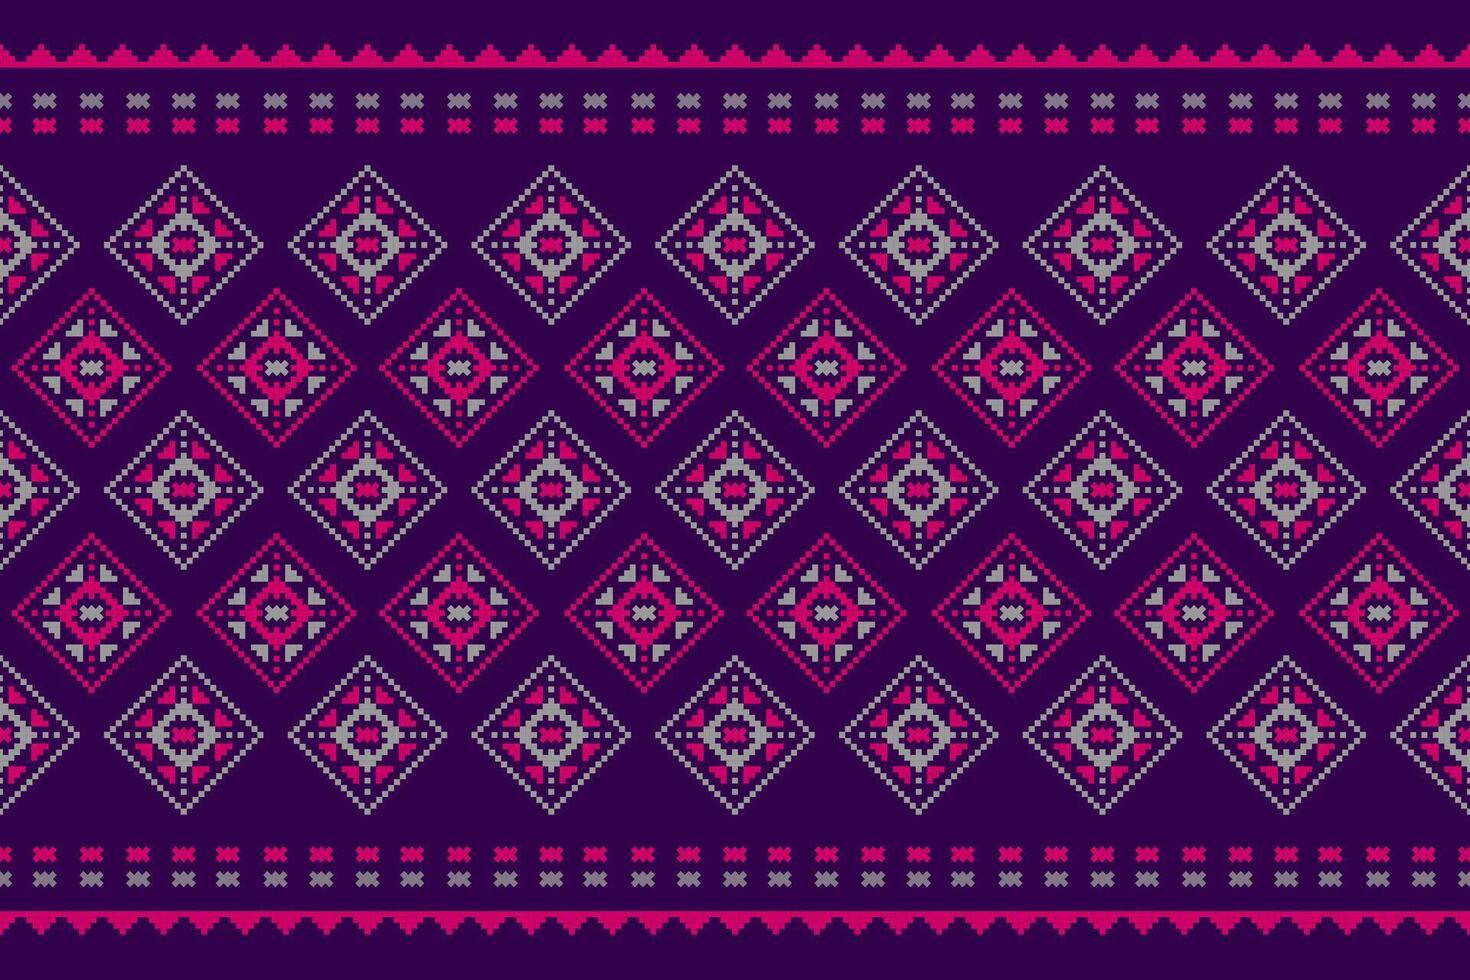 Abstract ethnic Aztec style. Ethnic geometric seamless pattern in tribal. American, Mexican style. Design for background, illustration, fabric, clothing, carpet, textile, batik, embroidery. vector